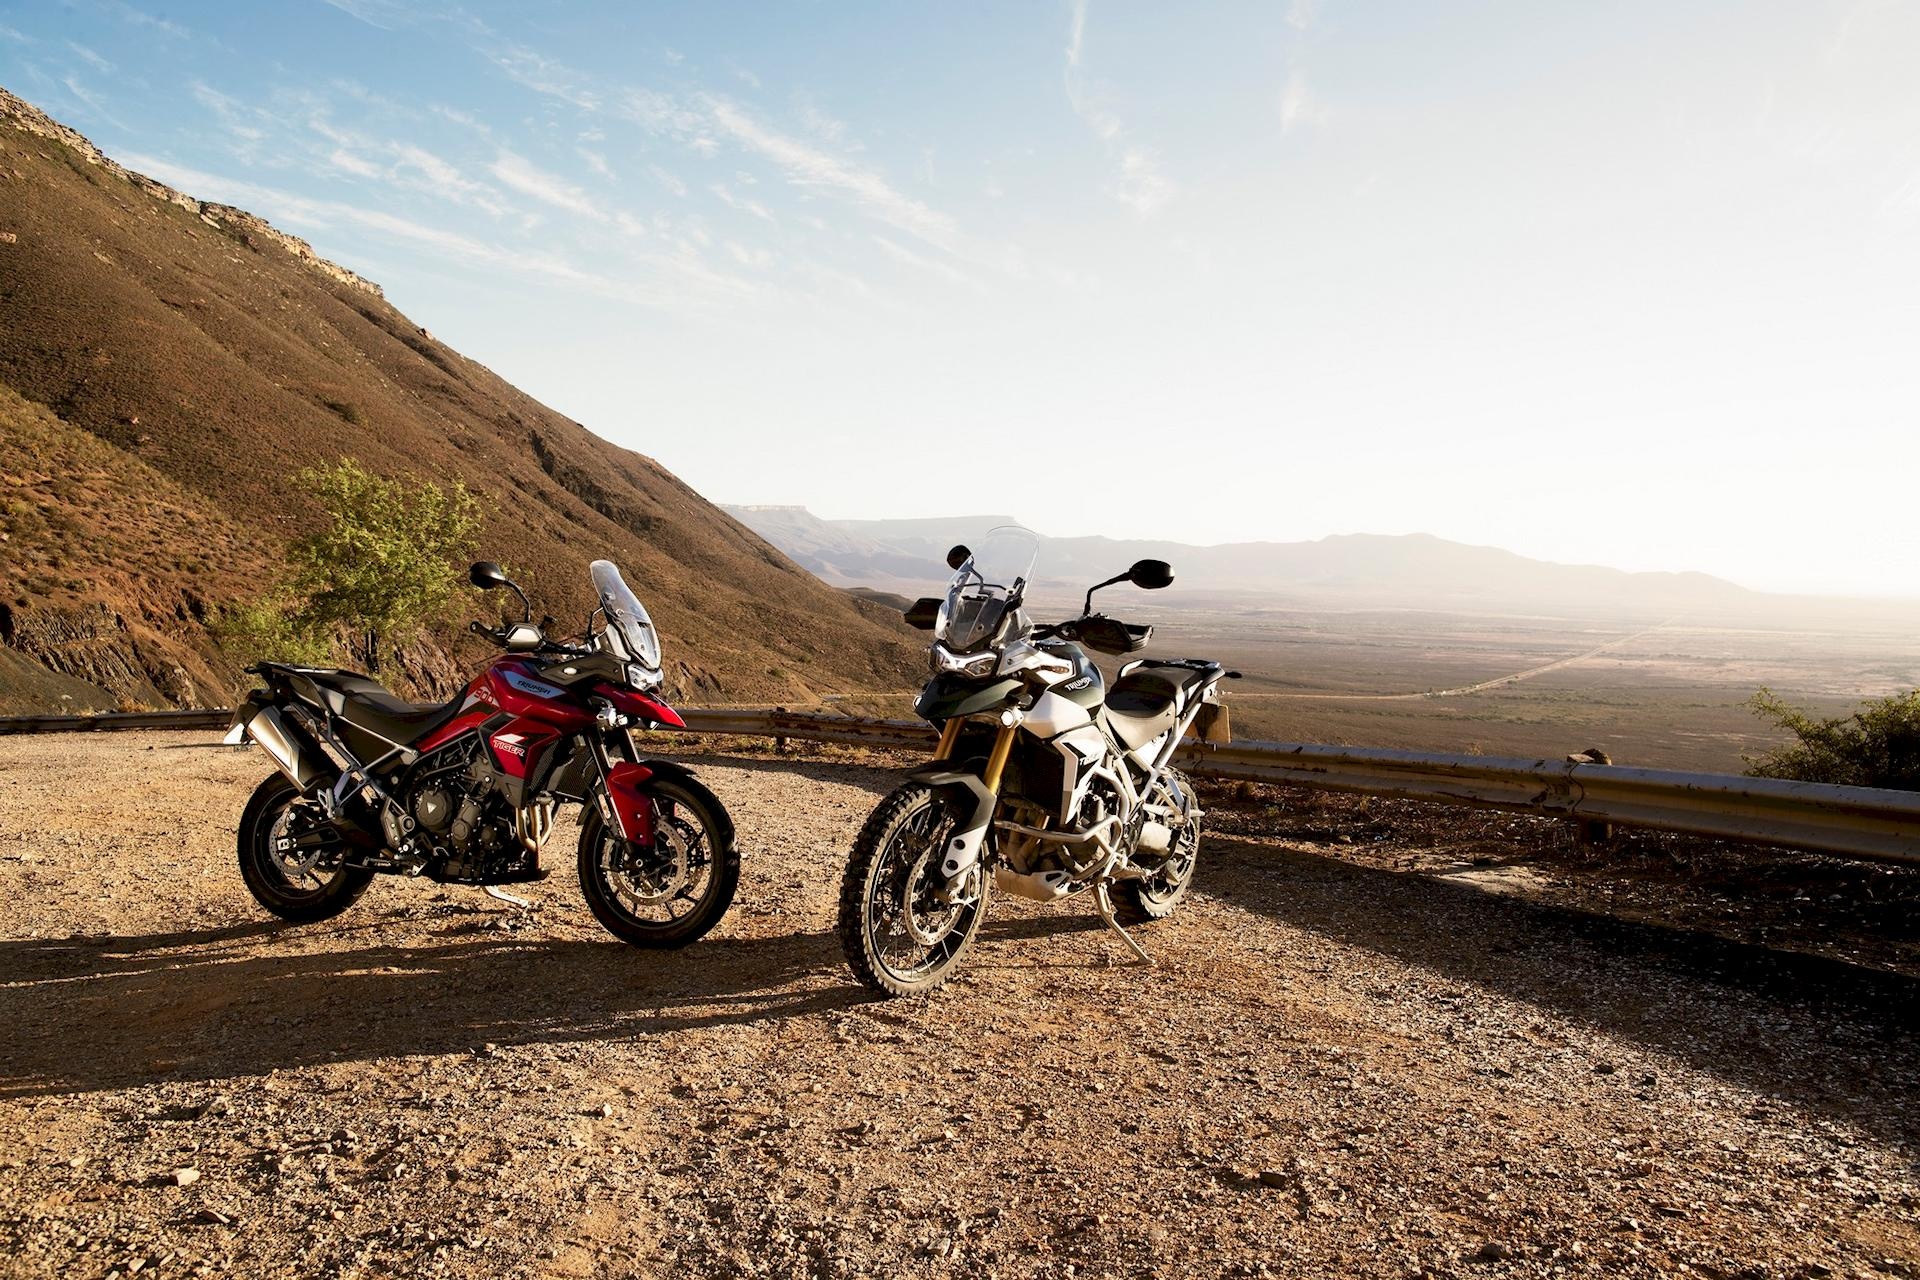 Triumph Tiger 900, RallyPro and GT variants, Notable features and specifications, Price range, 1920x1280 HD Desktop